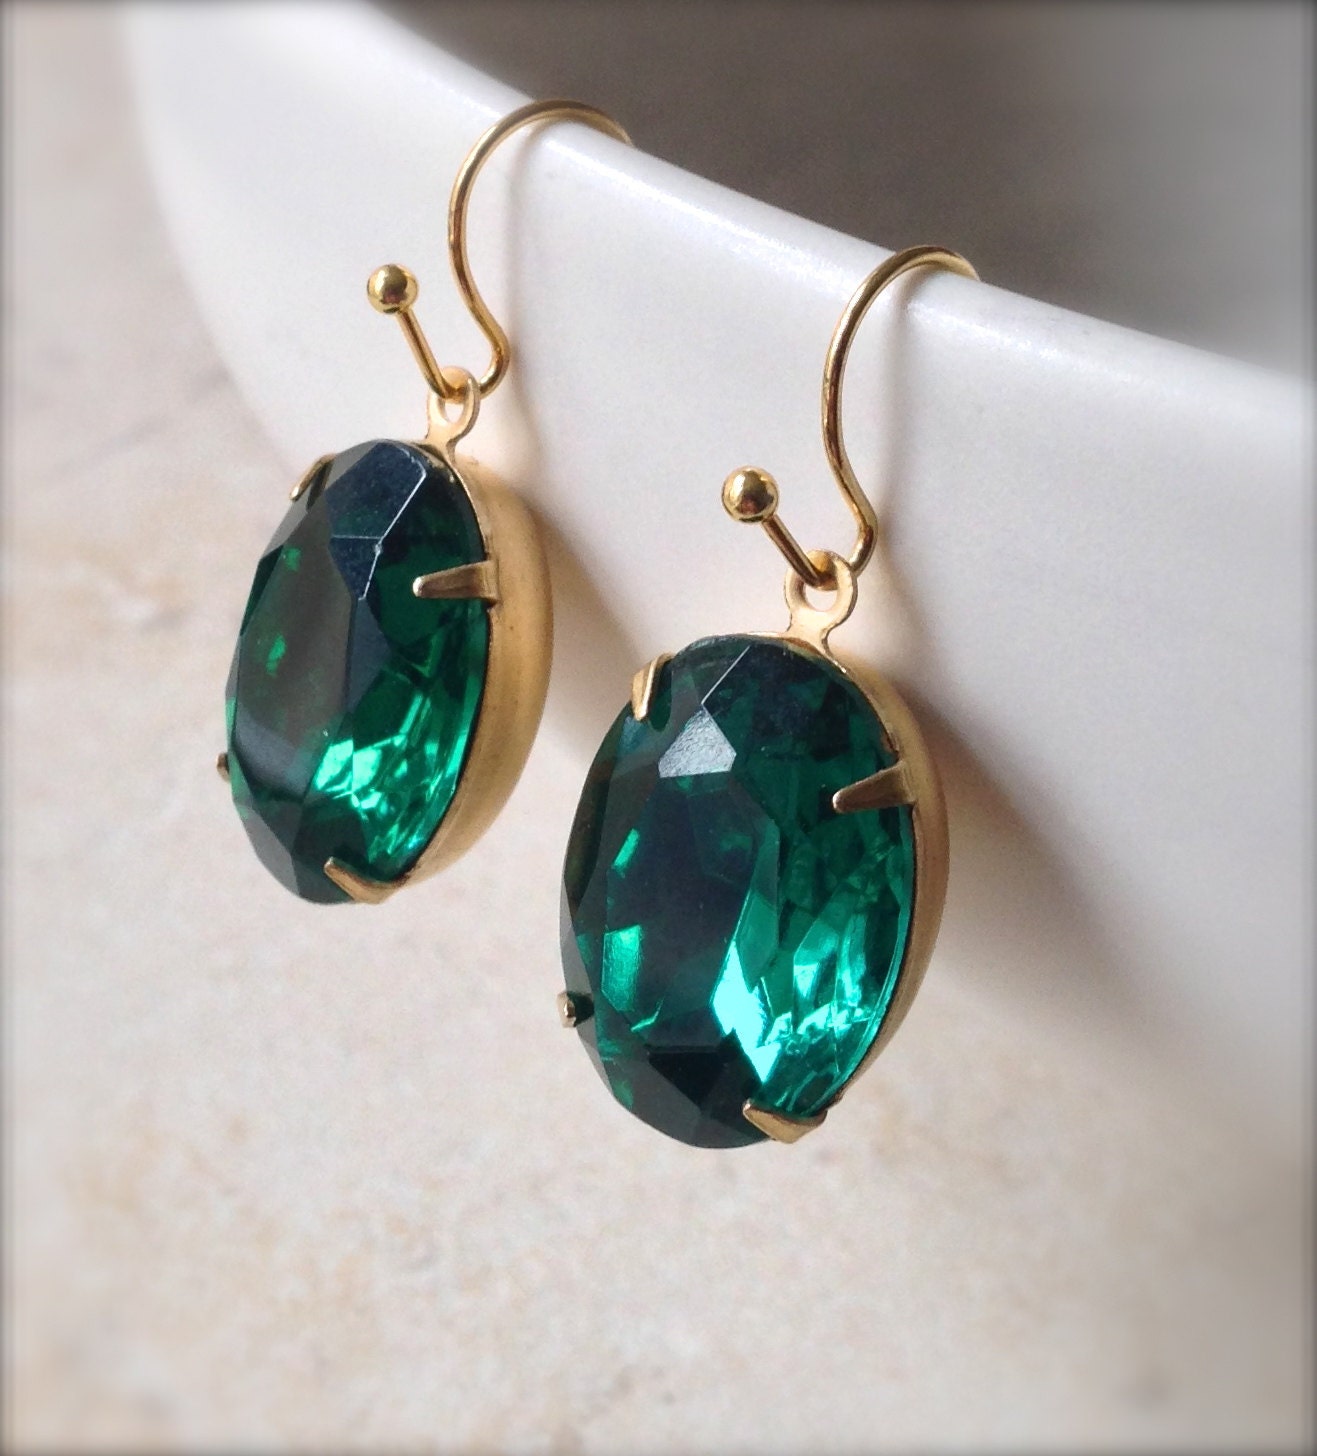 Emerald Green Rhinestone Earrings Gold Filled Oval Vintage Style 18 x 13mm Gifts Under 20 for Her - GoldSunDesigns